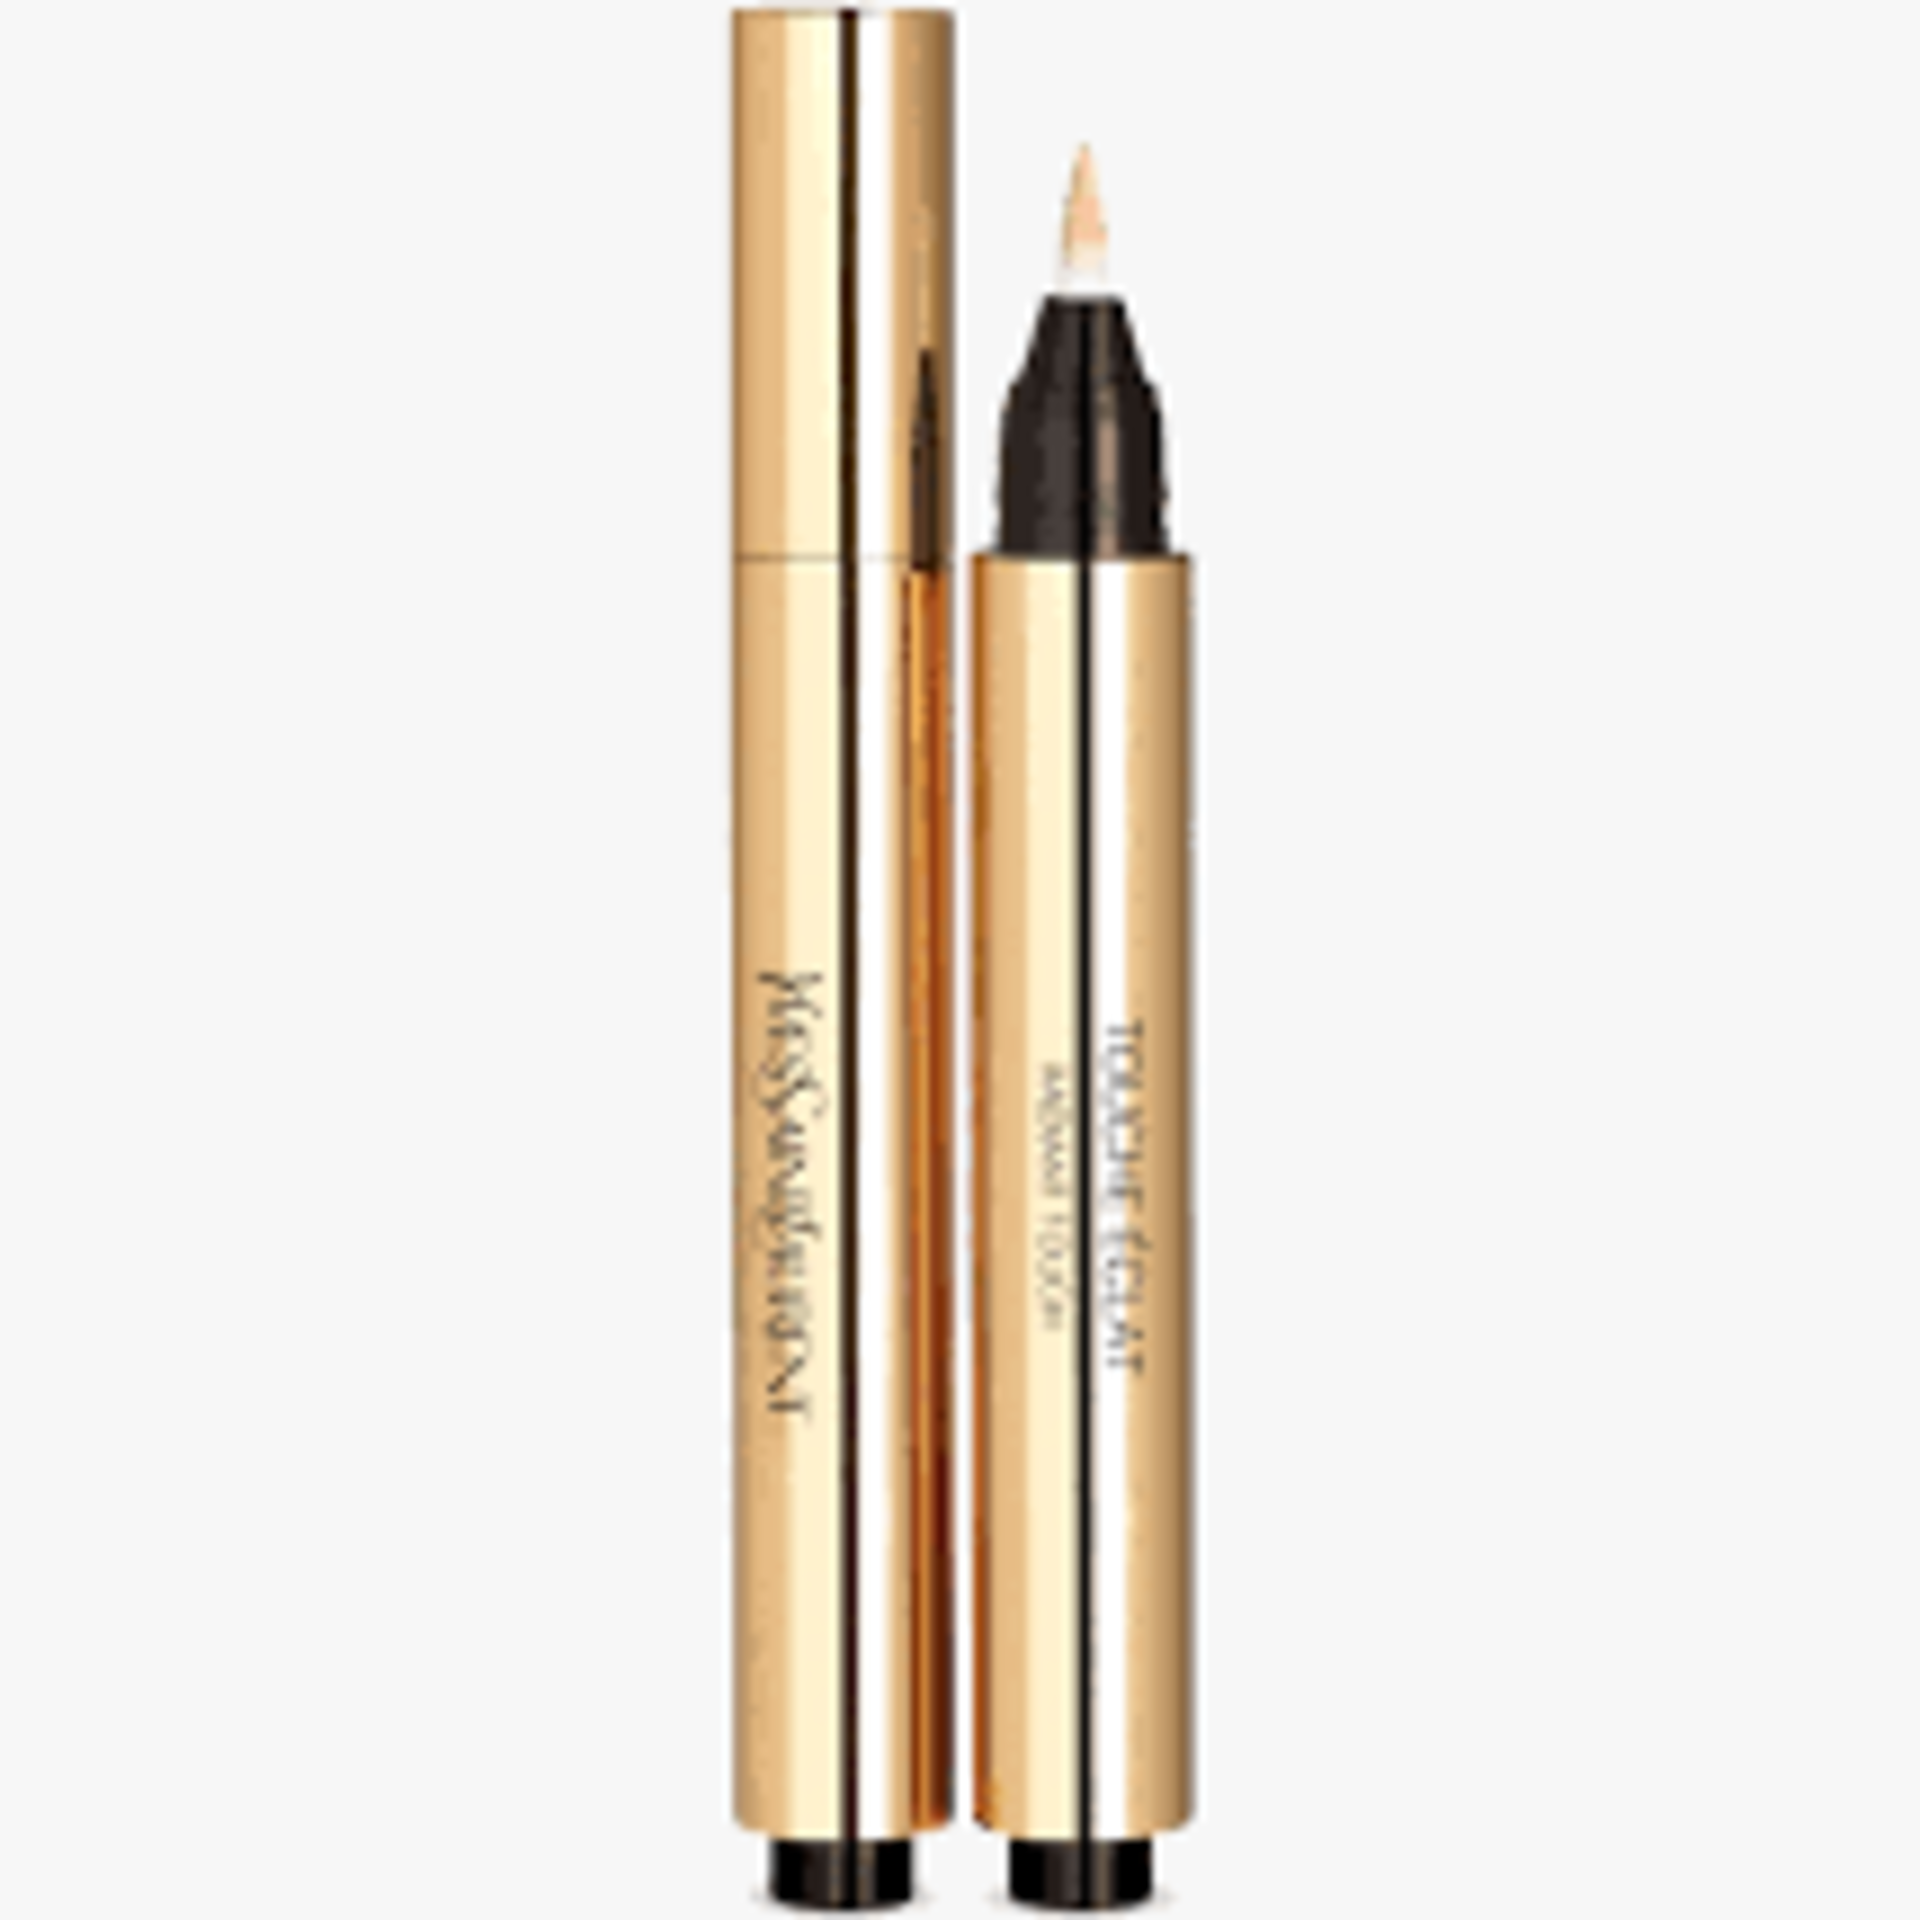 RRP £27 YSL Touche Eclat Concealer (Shade 7) (Ex Display) (Appraisals Available Upon Request) (